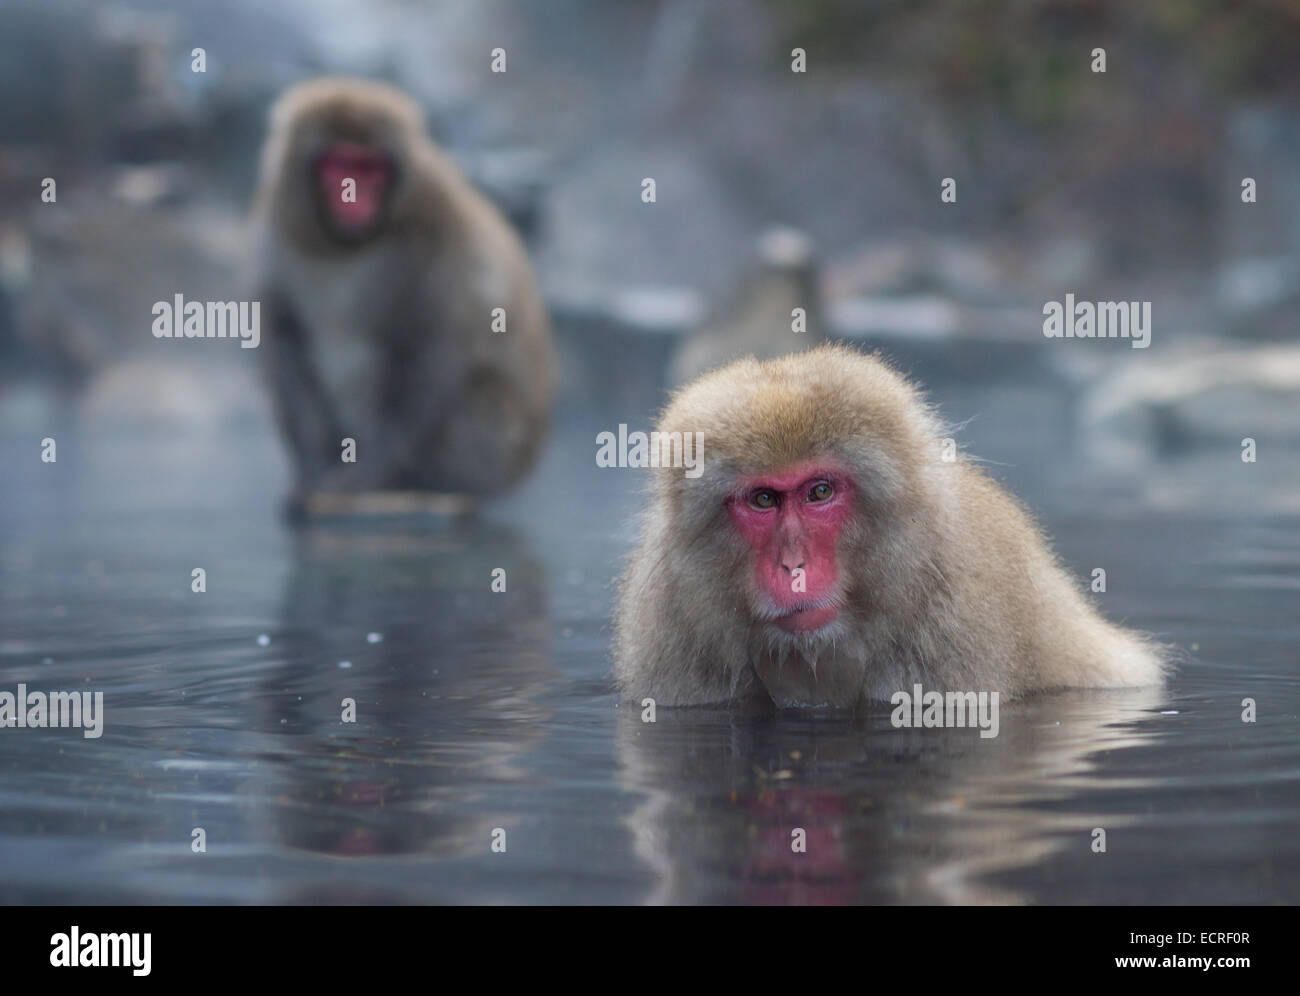 Snow monkey or Japanese Macaque in hot spring onsen Stock Photo